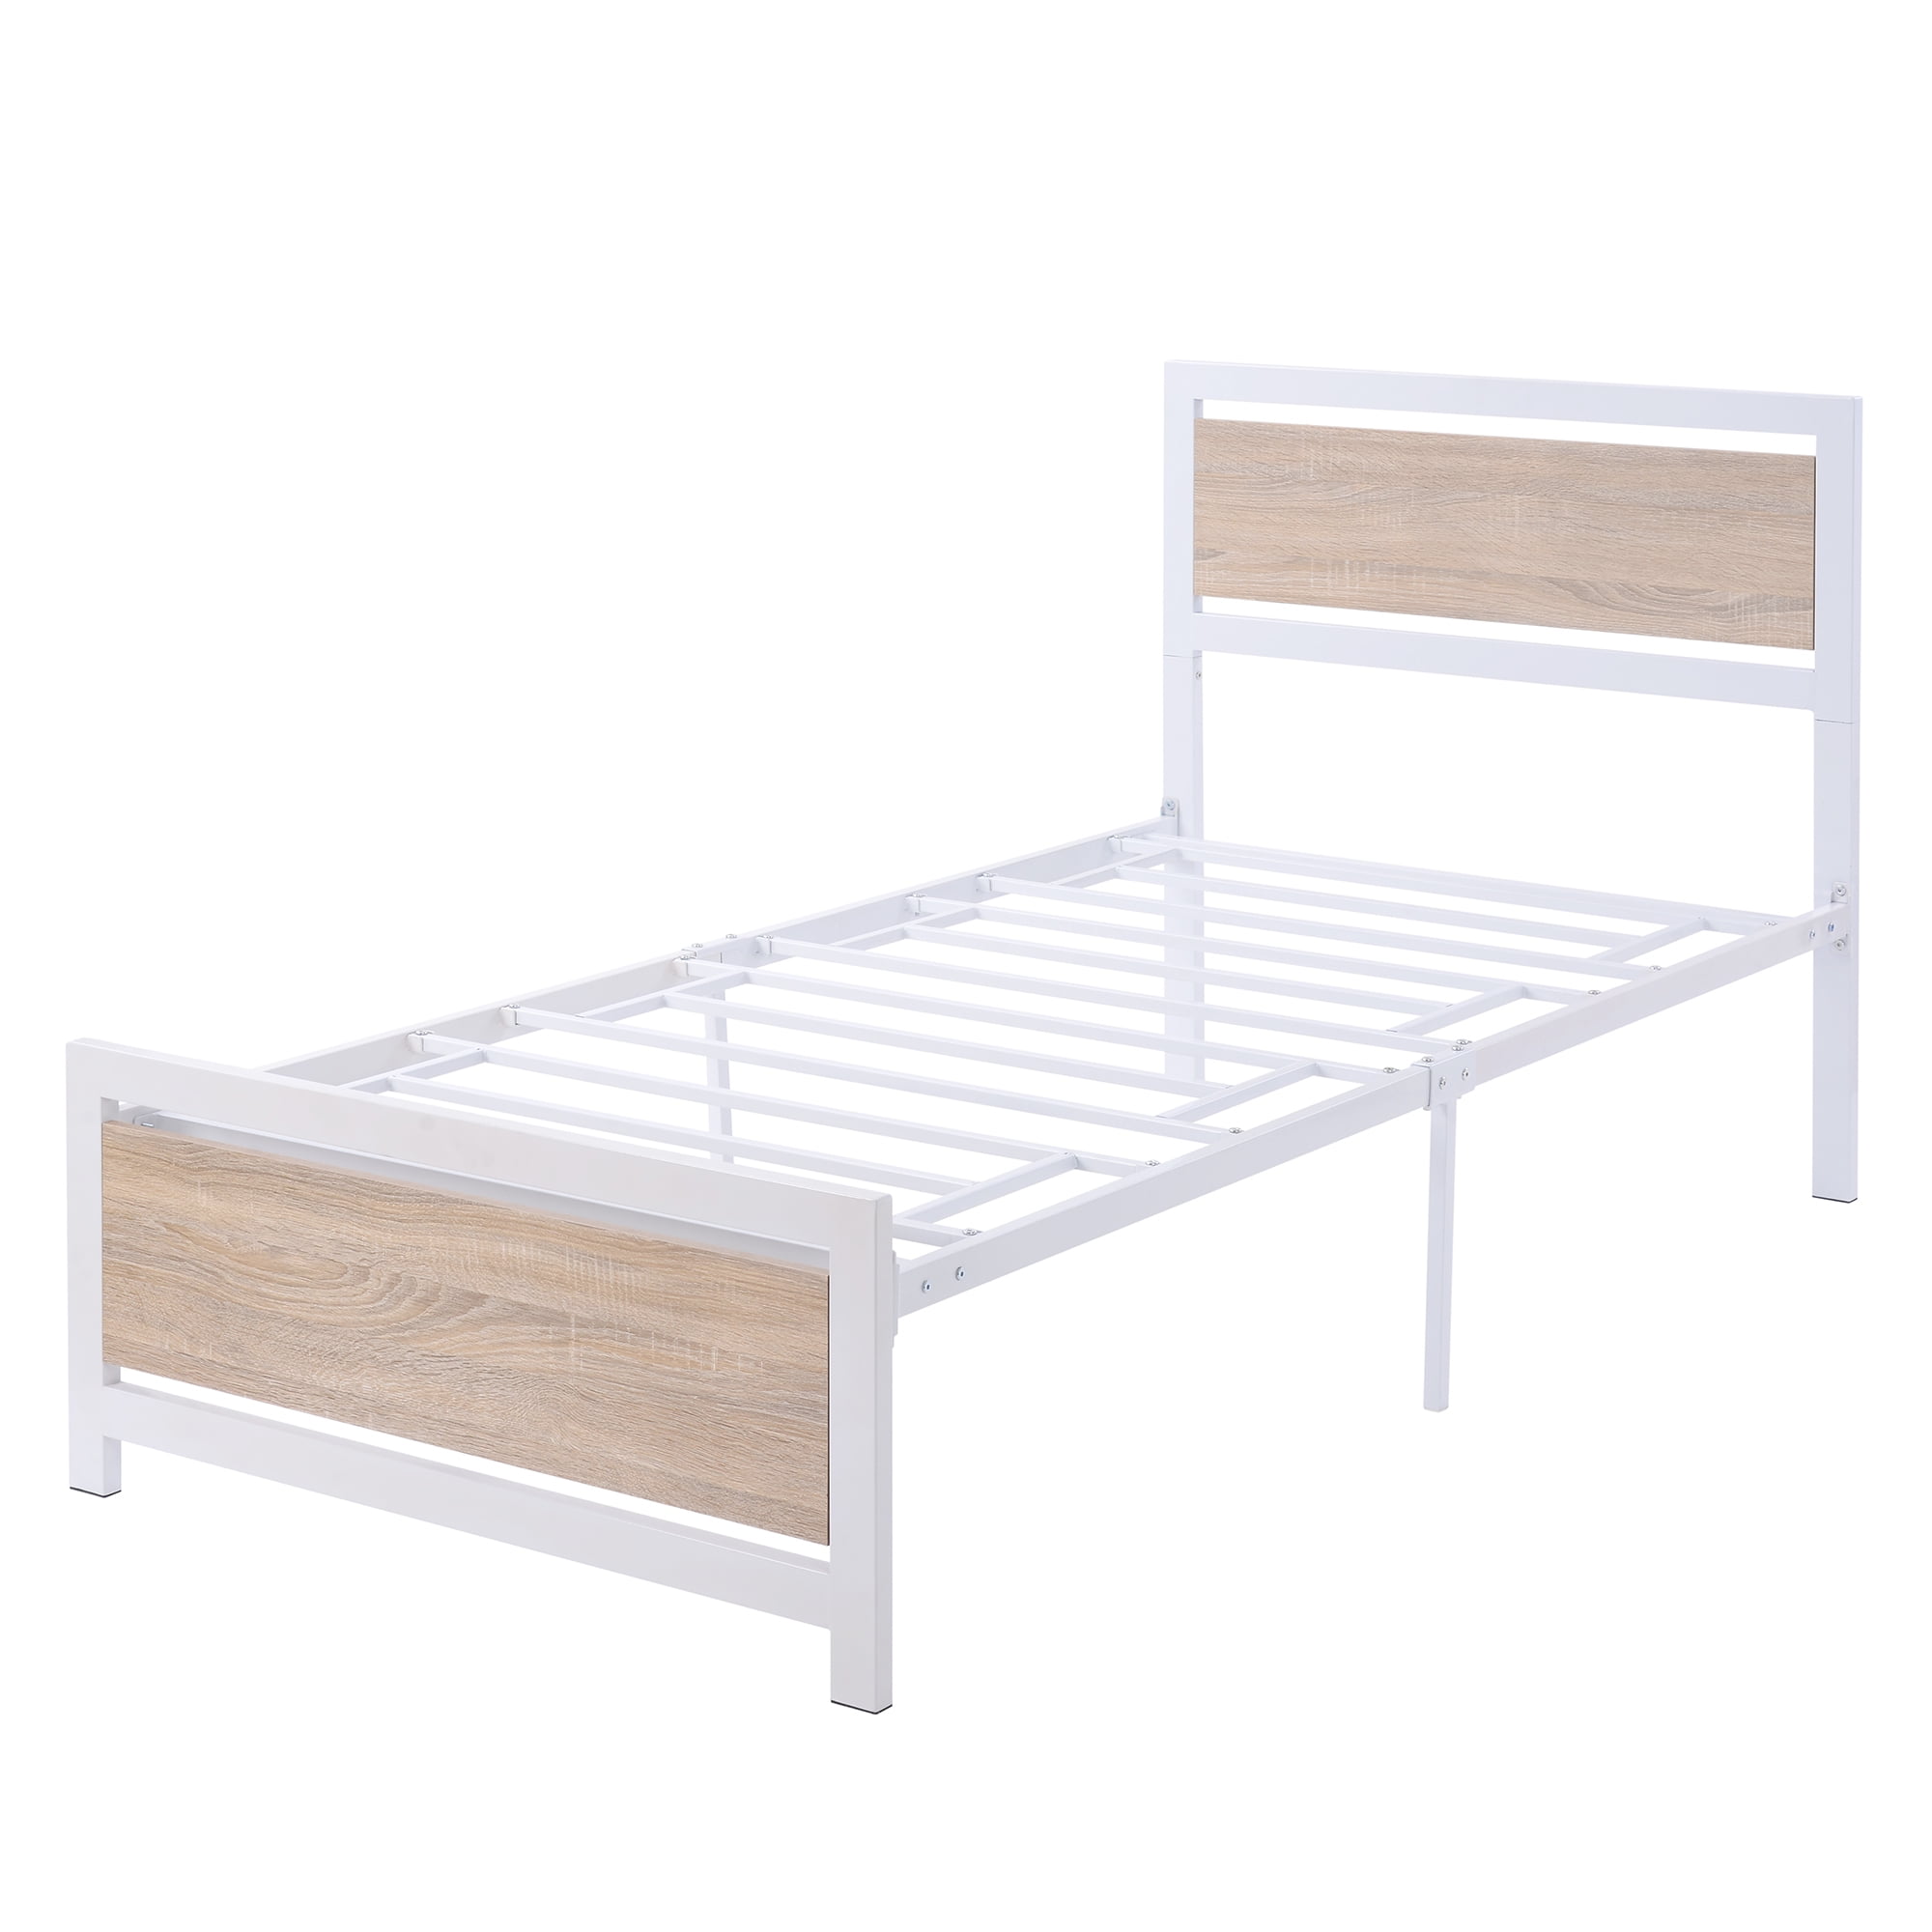 Labymos Metal And Wood Bed Frame With, How To Put A Wooden Twin Bed Frame Together